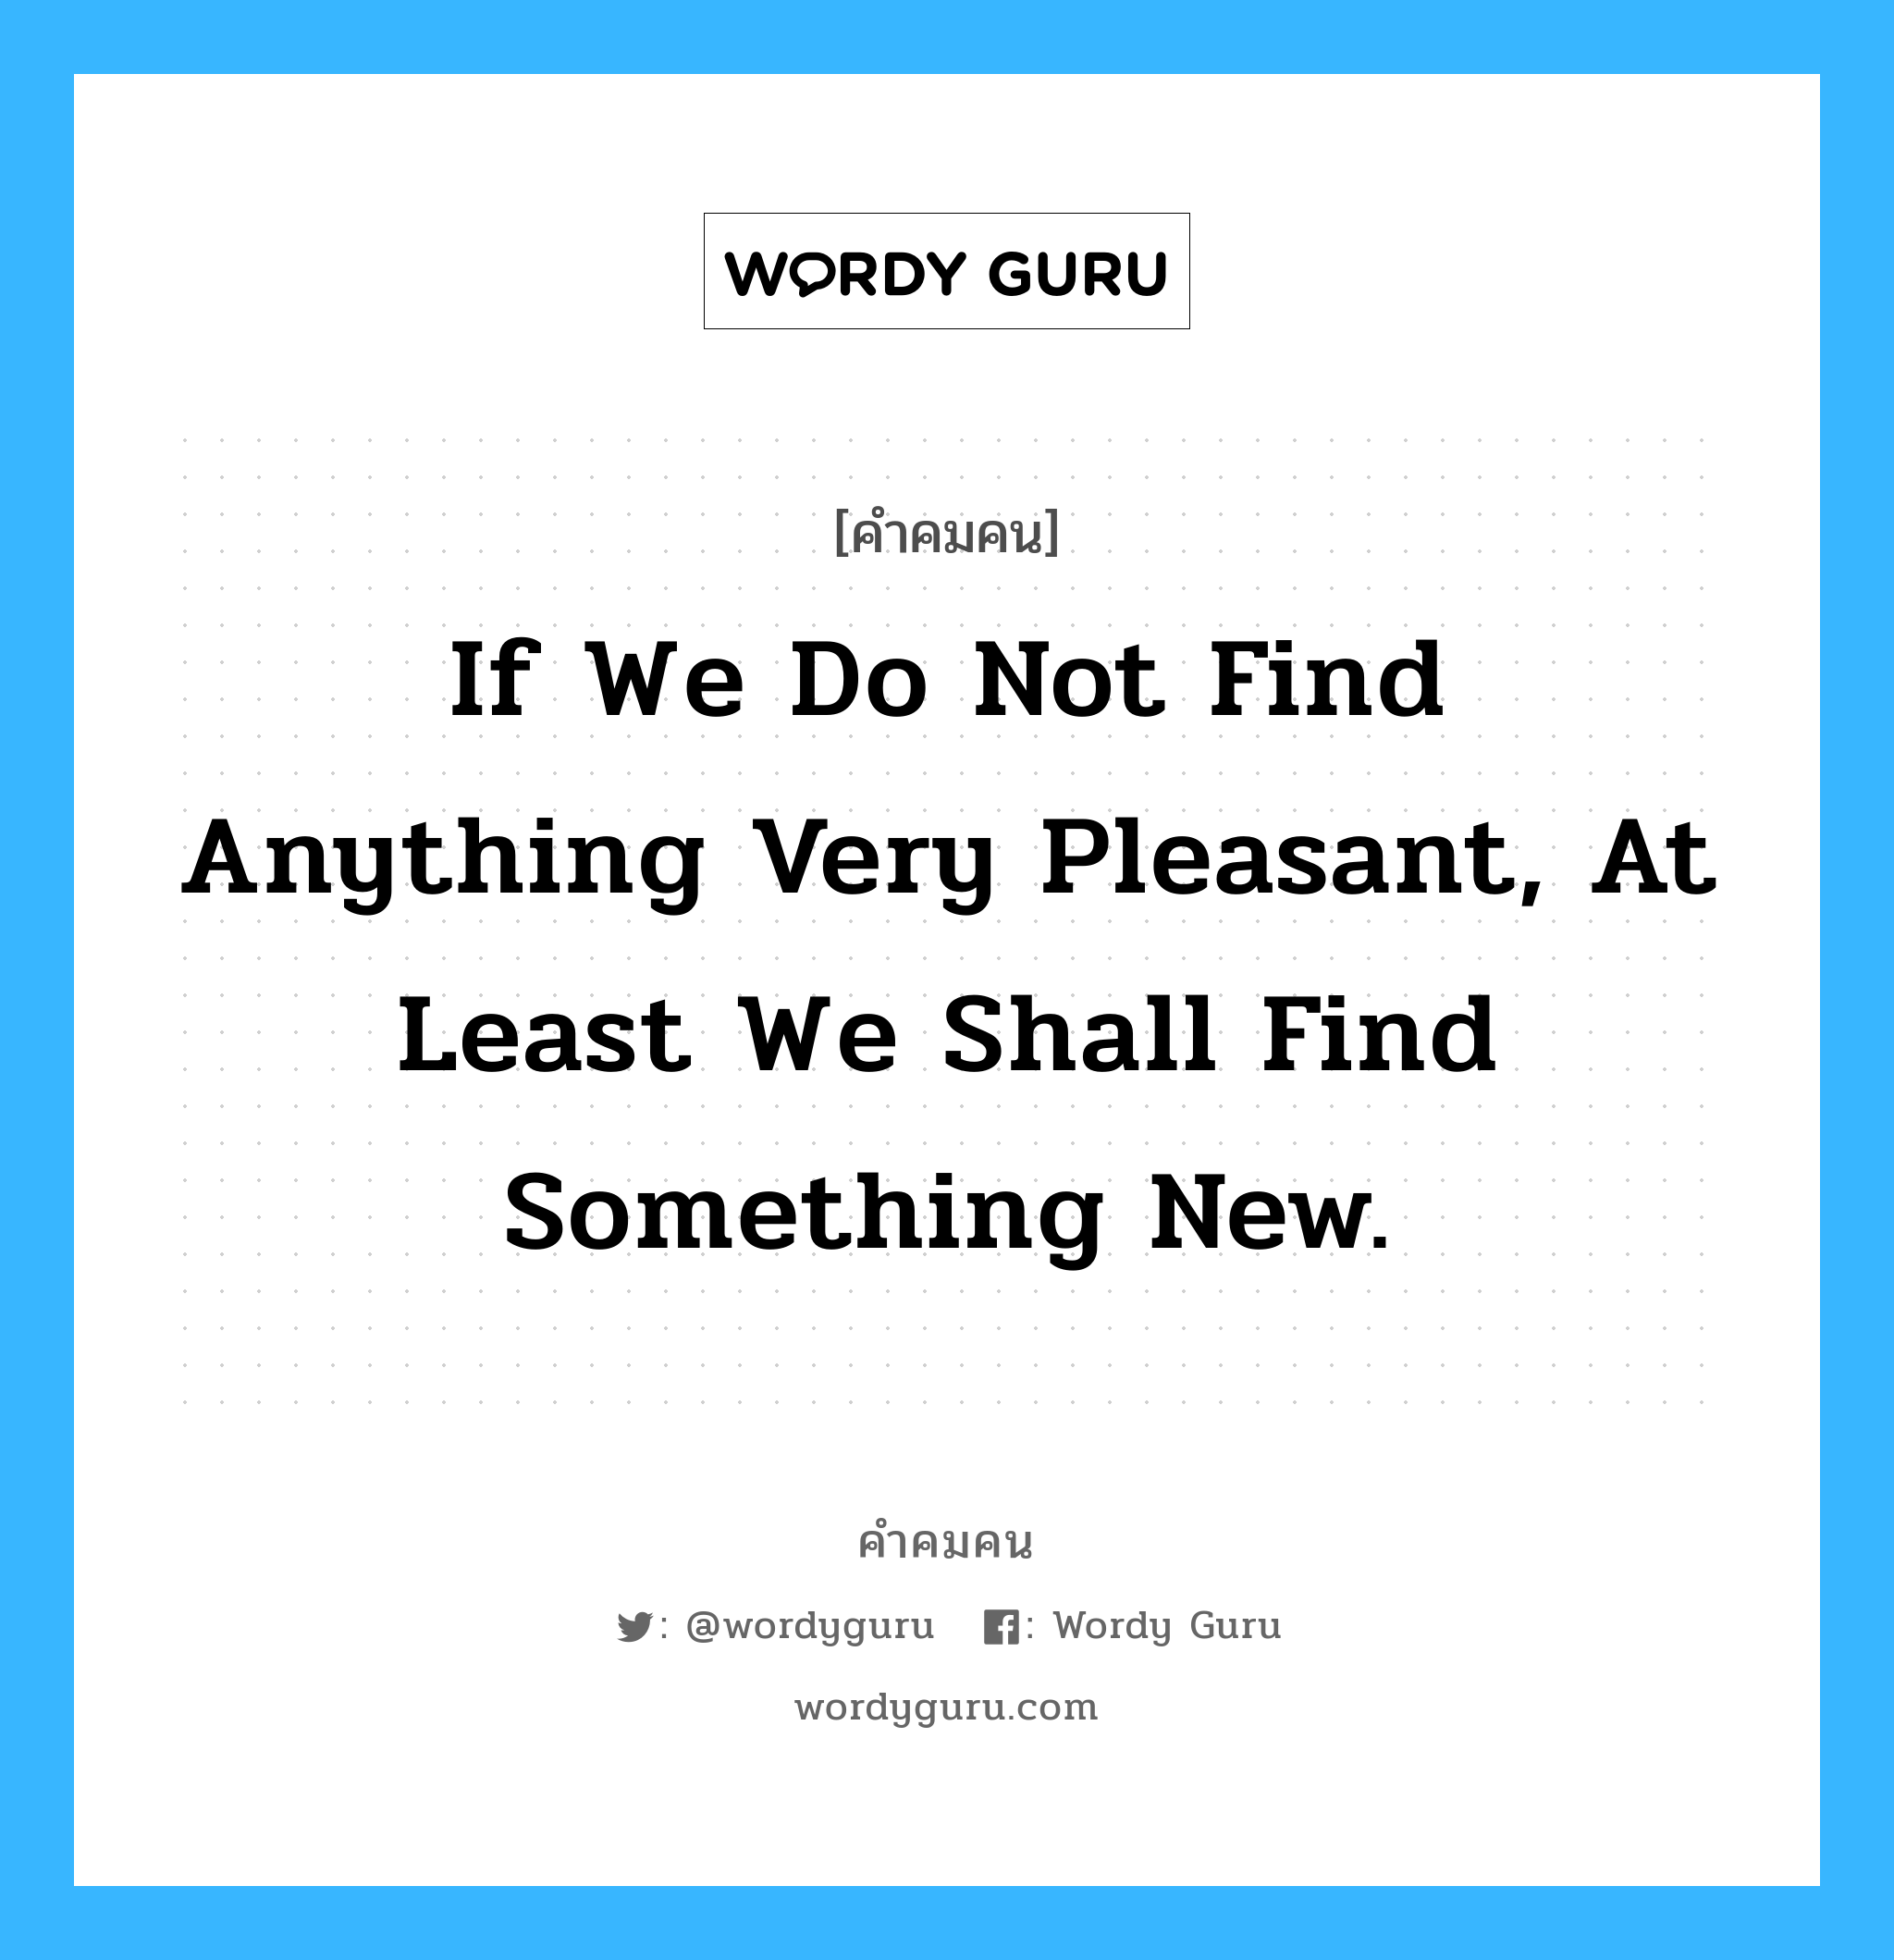 If we do not find anything very pleasant, at least we shall find something new., คำคมคน If we do not find anything very pleasant, at least we shall find something new. ถึงแม้ว่าเราจะไม่พบสิ่งที่พอใจ อย่างน้อย เราก็จะได้เจอสิ่งใหม่ๆ Voltaire หมวด Voltaire